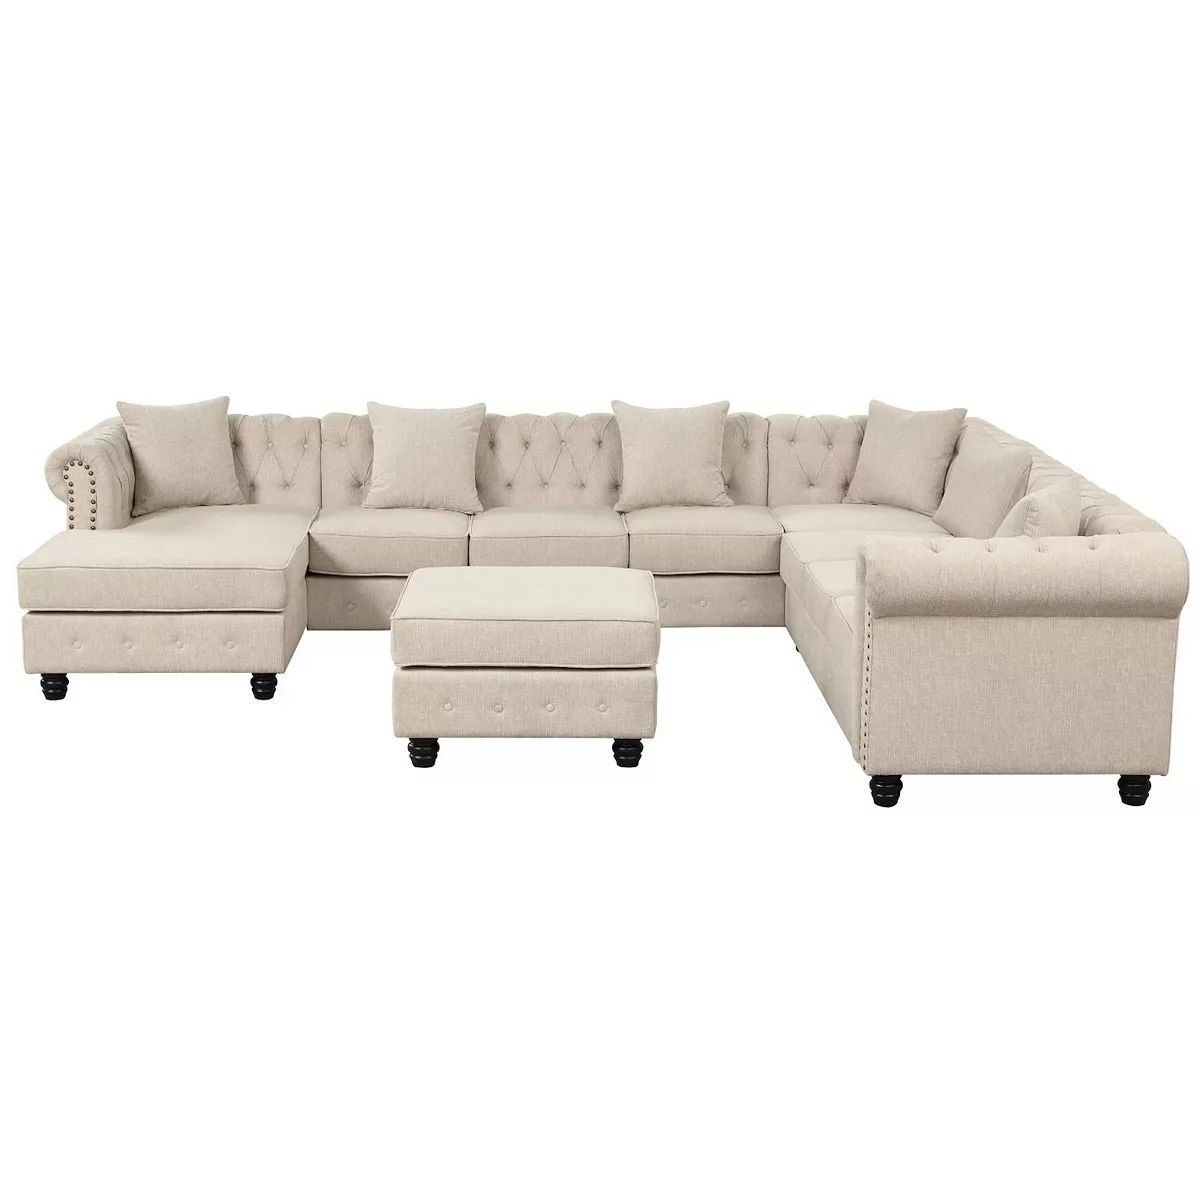 Morden Fort Linen Master Four-piece Sofa Living Room Collection Curve Sofa With Footrest | Kohl's